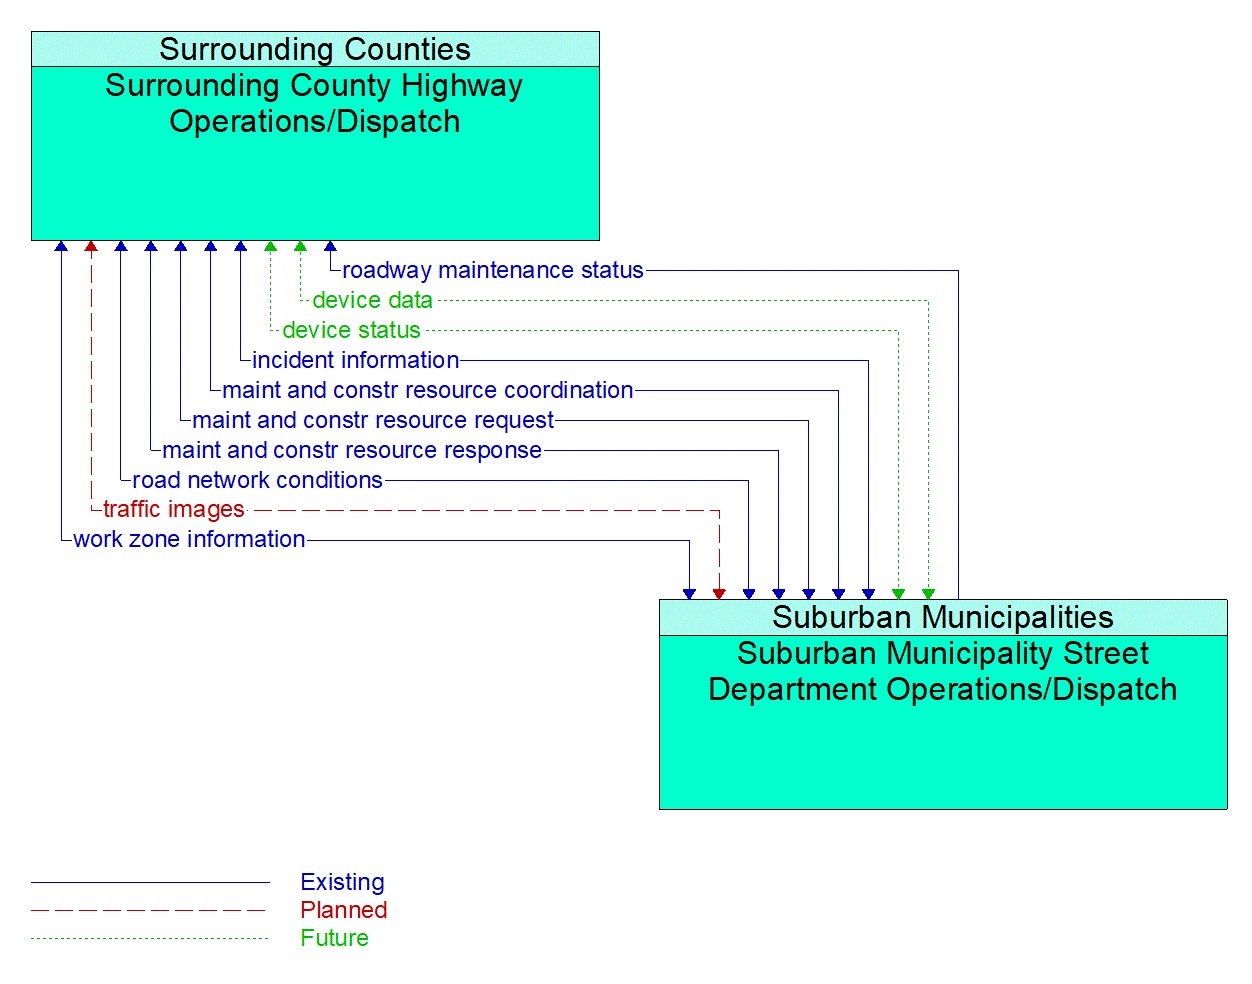 Architecture Flow Diagram: Suburban Municipality Street Department Operations/Dispatch <--> Surrounding County Highway Operations/Dispatch